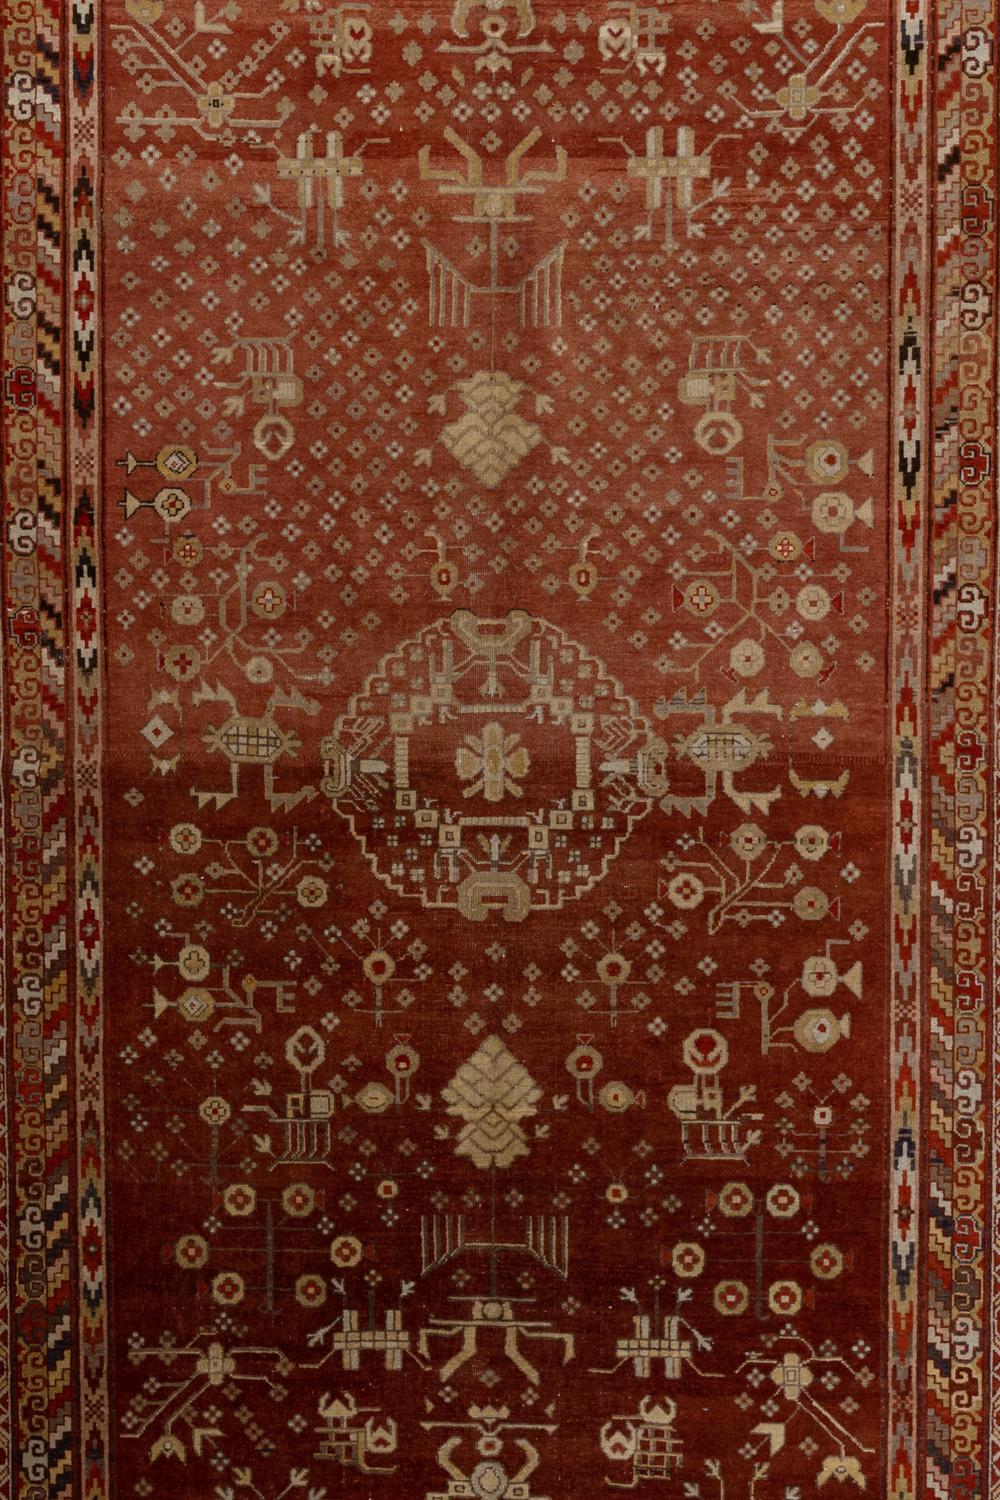 Age: Circa 1930

Colors: Sienna, black, tan

Pile: Medium

Wear Notes: 1 (slight fading consistent with age)

Material: Wool on Cotton. 

Antique Khotan rug with a high knot count and precise attention to detail. We love that with each